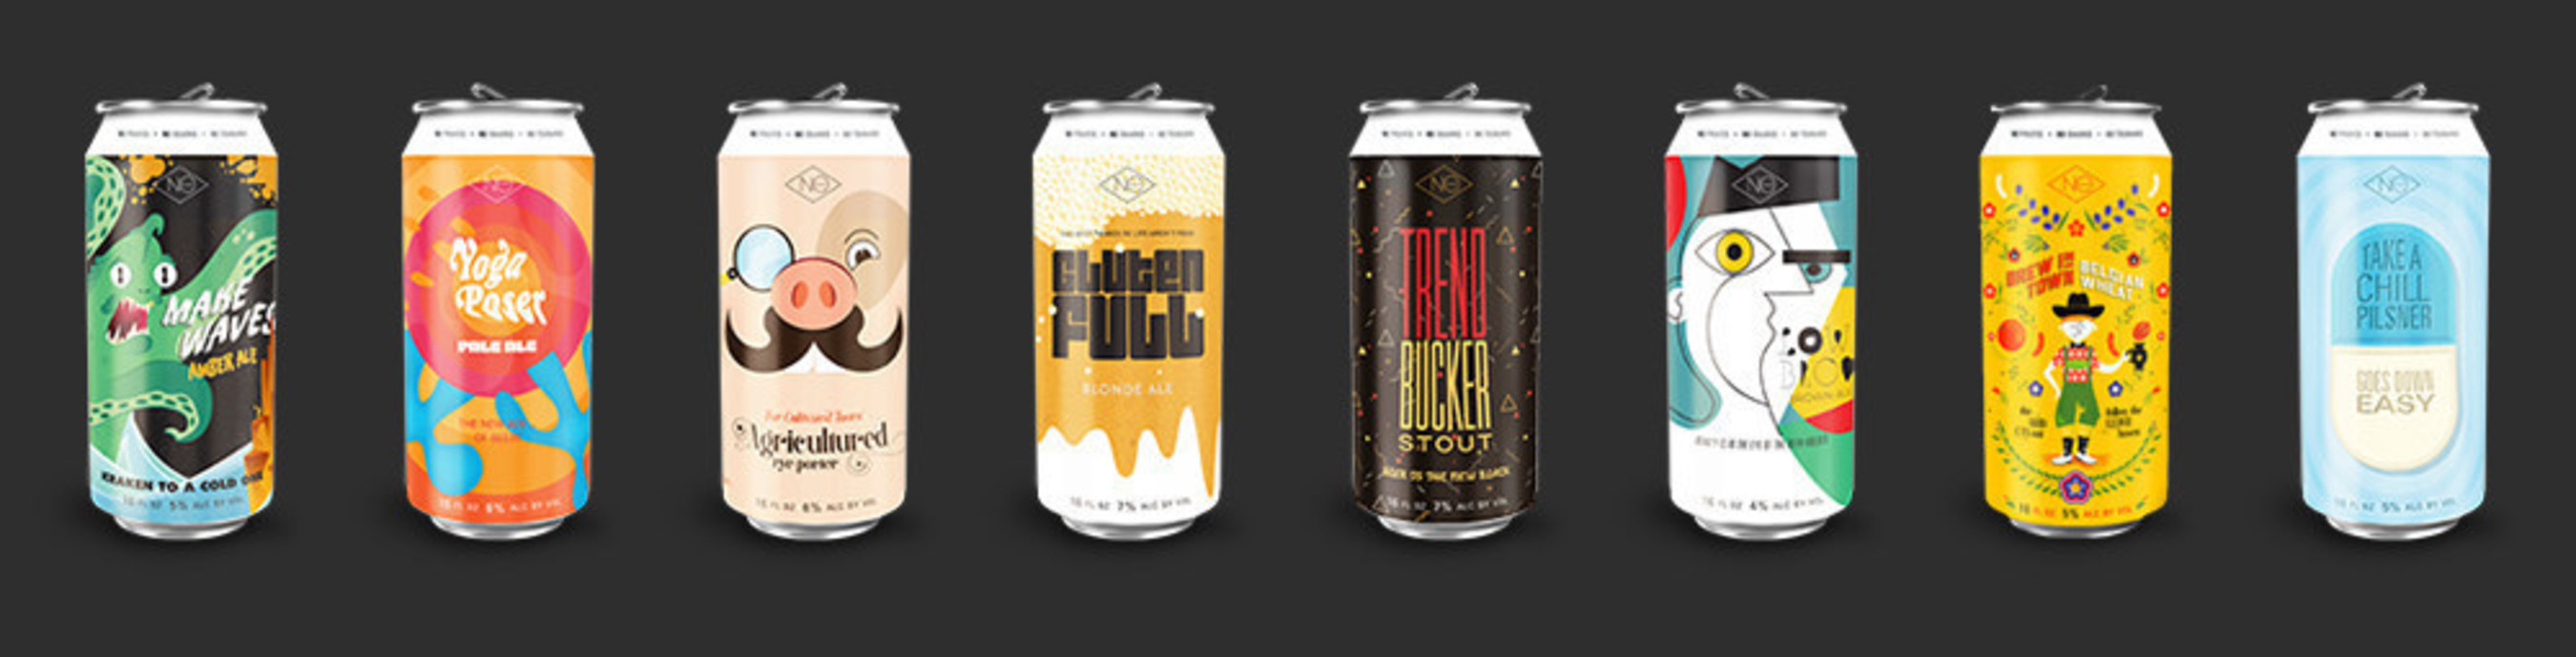 NoCoast Beer Co. Product Lineup